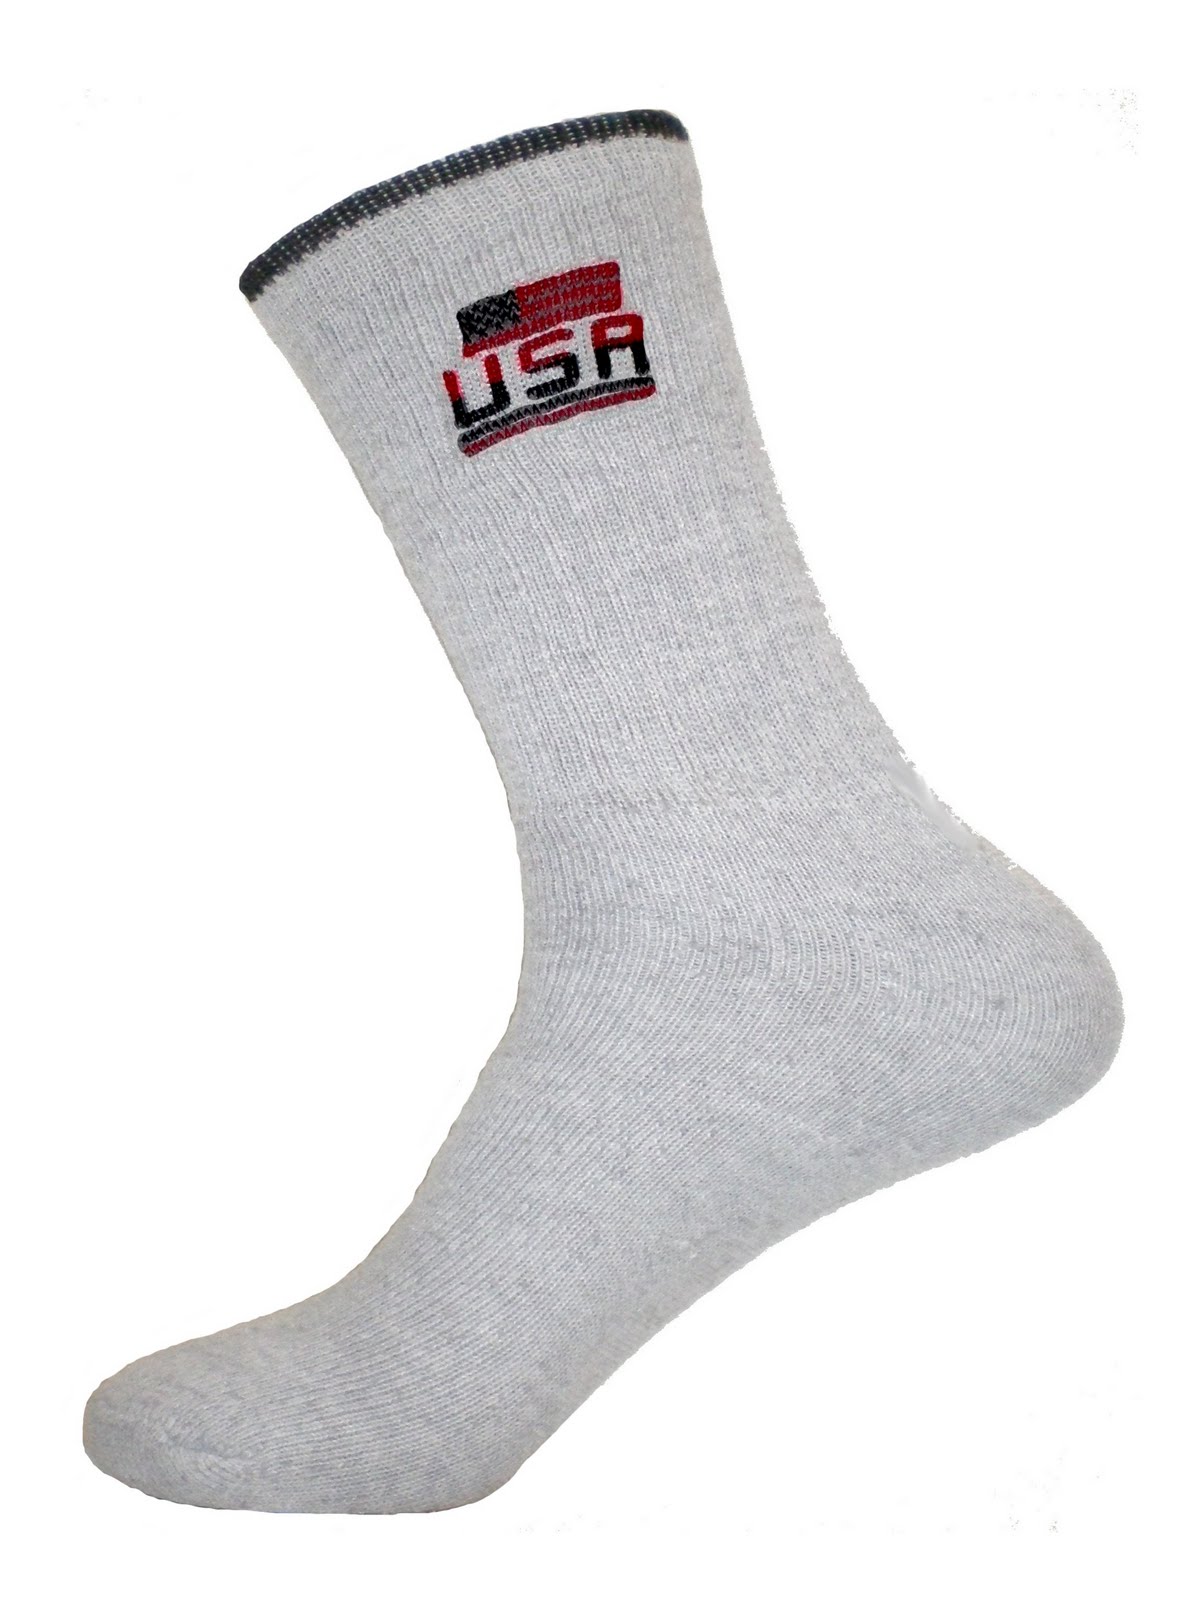 HOLLYWOOD SOX AND UNDERGARMENTS: 13 CREW G/USA